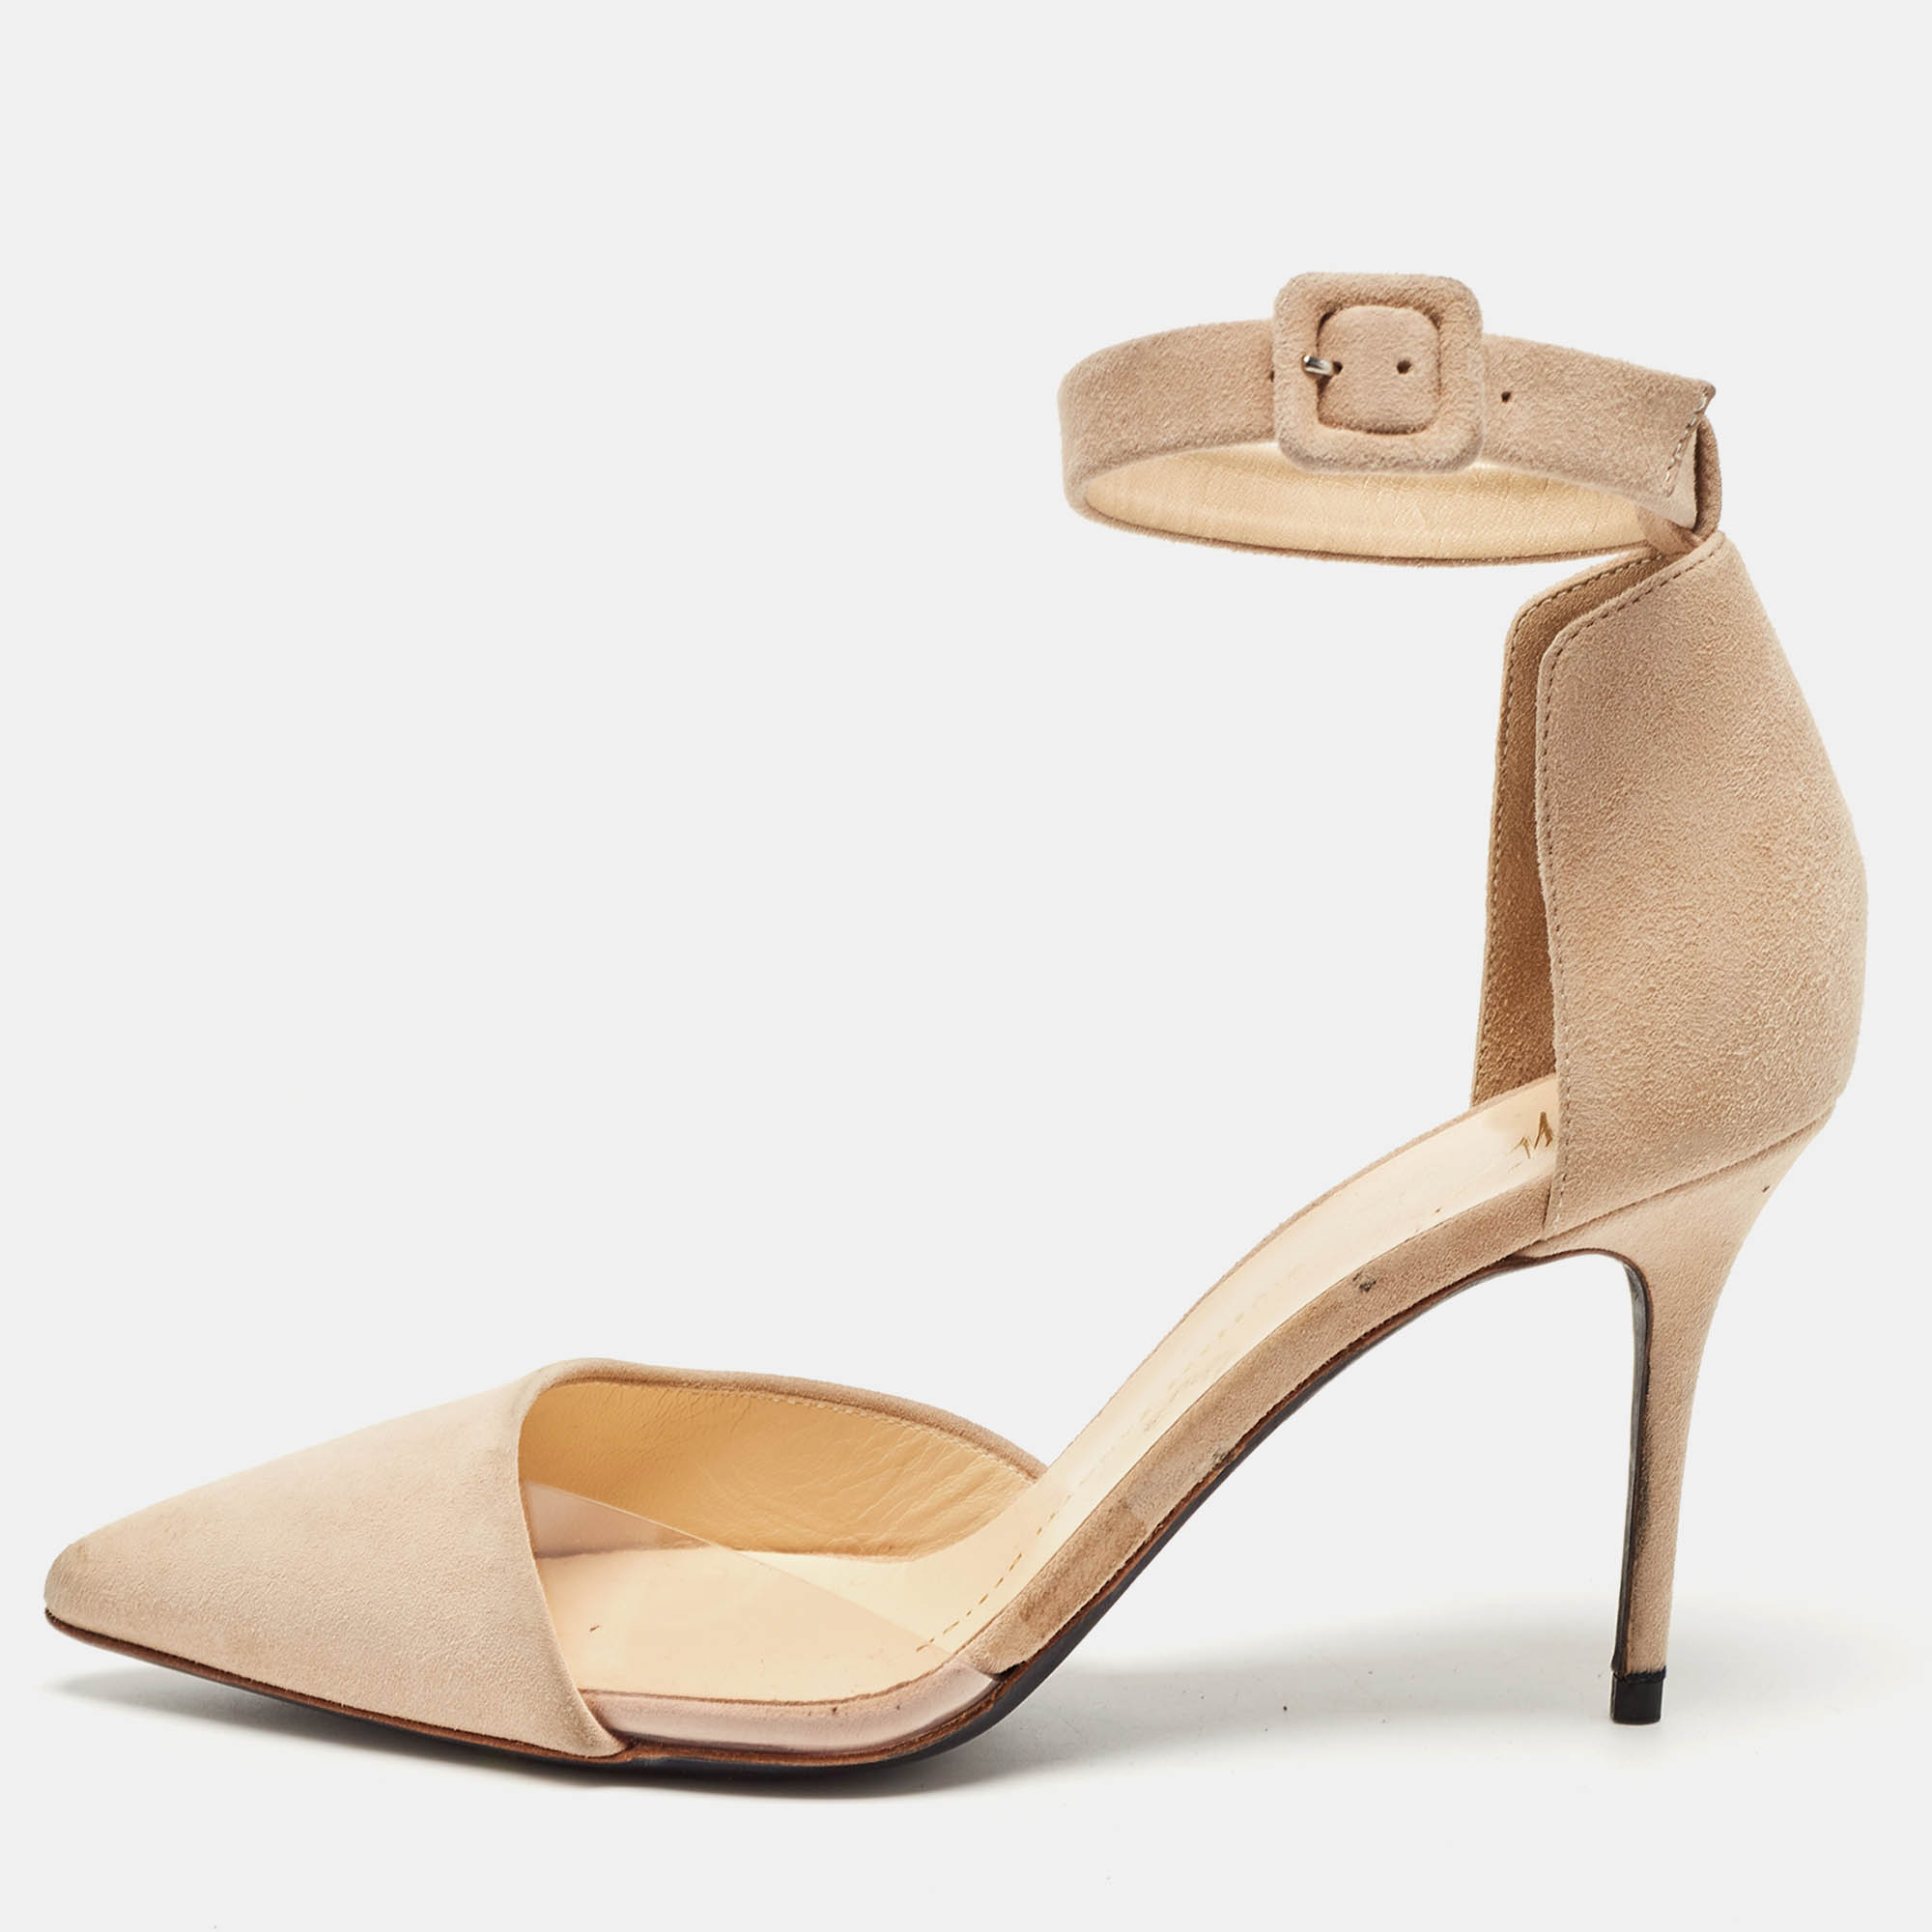 Giuseppe zanotti beige suede and pvc d'orsay pumps size 36.5